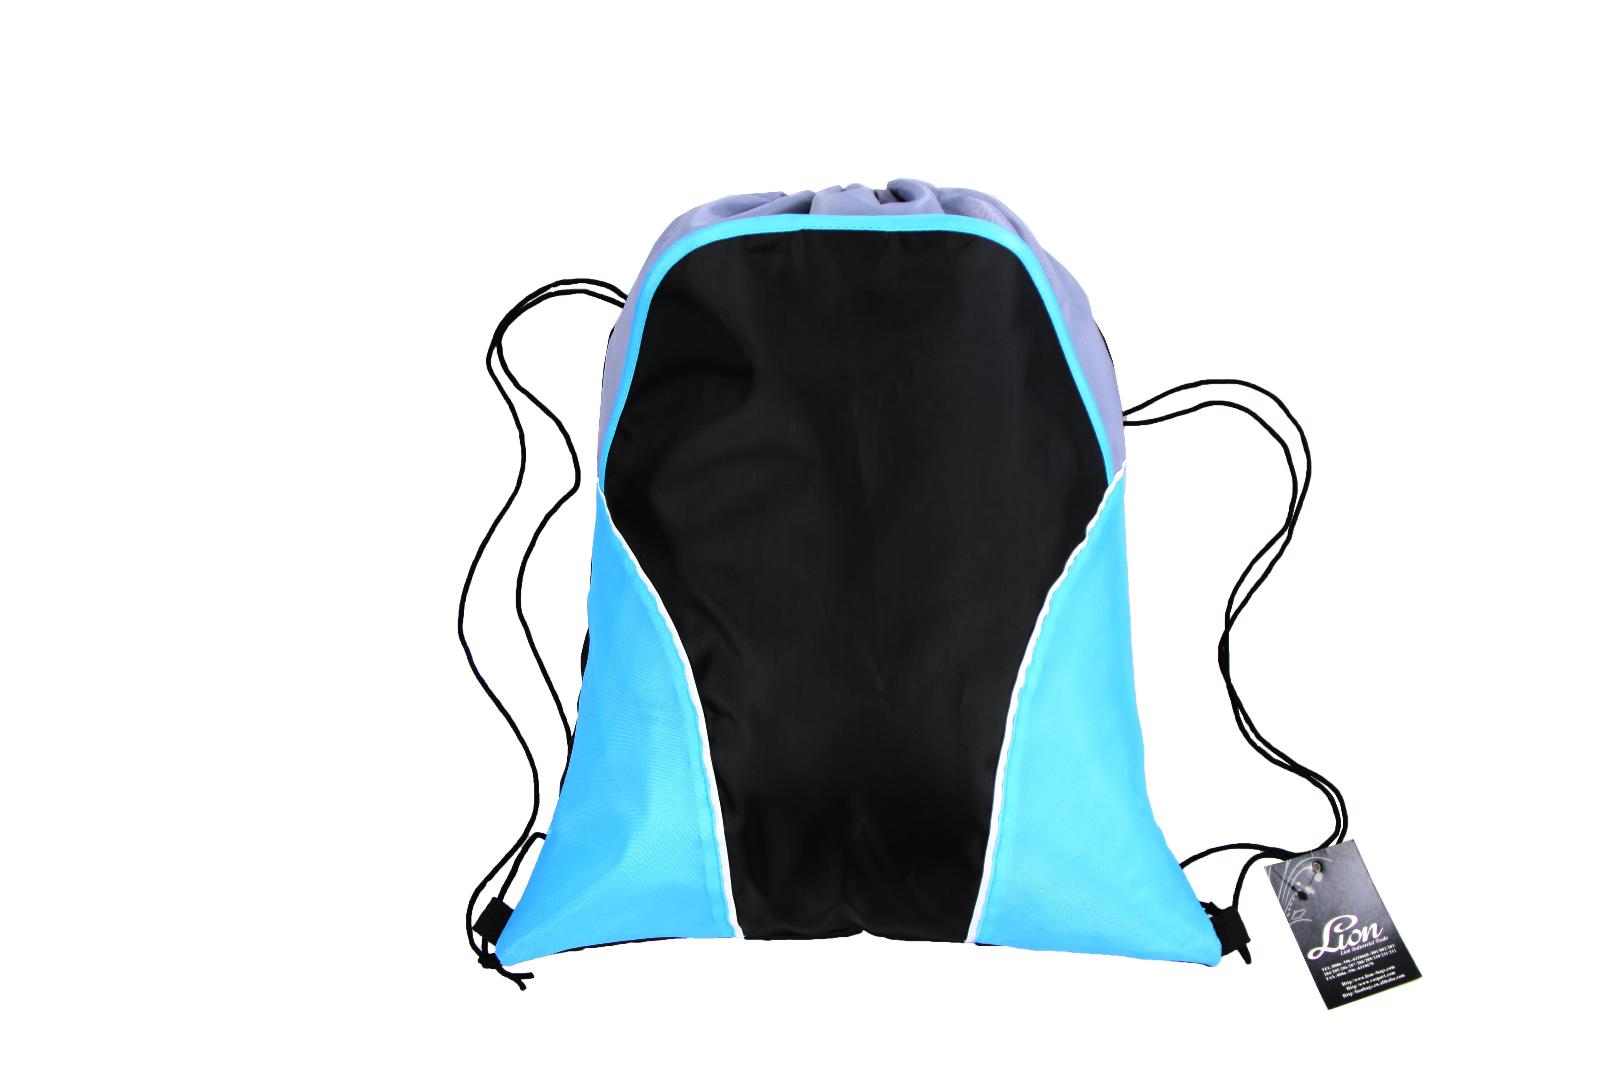 Whloesale drawstring bags backpack draw string bag